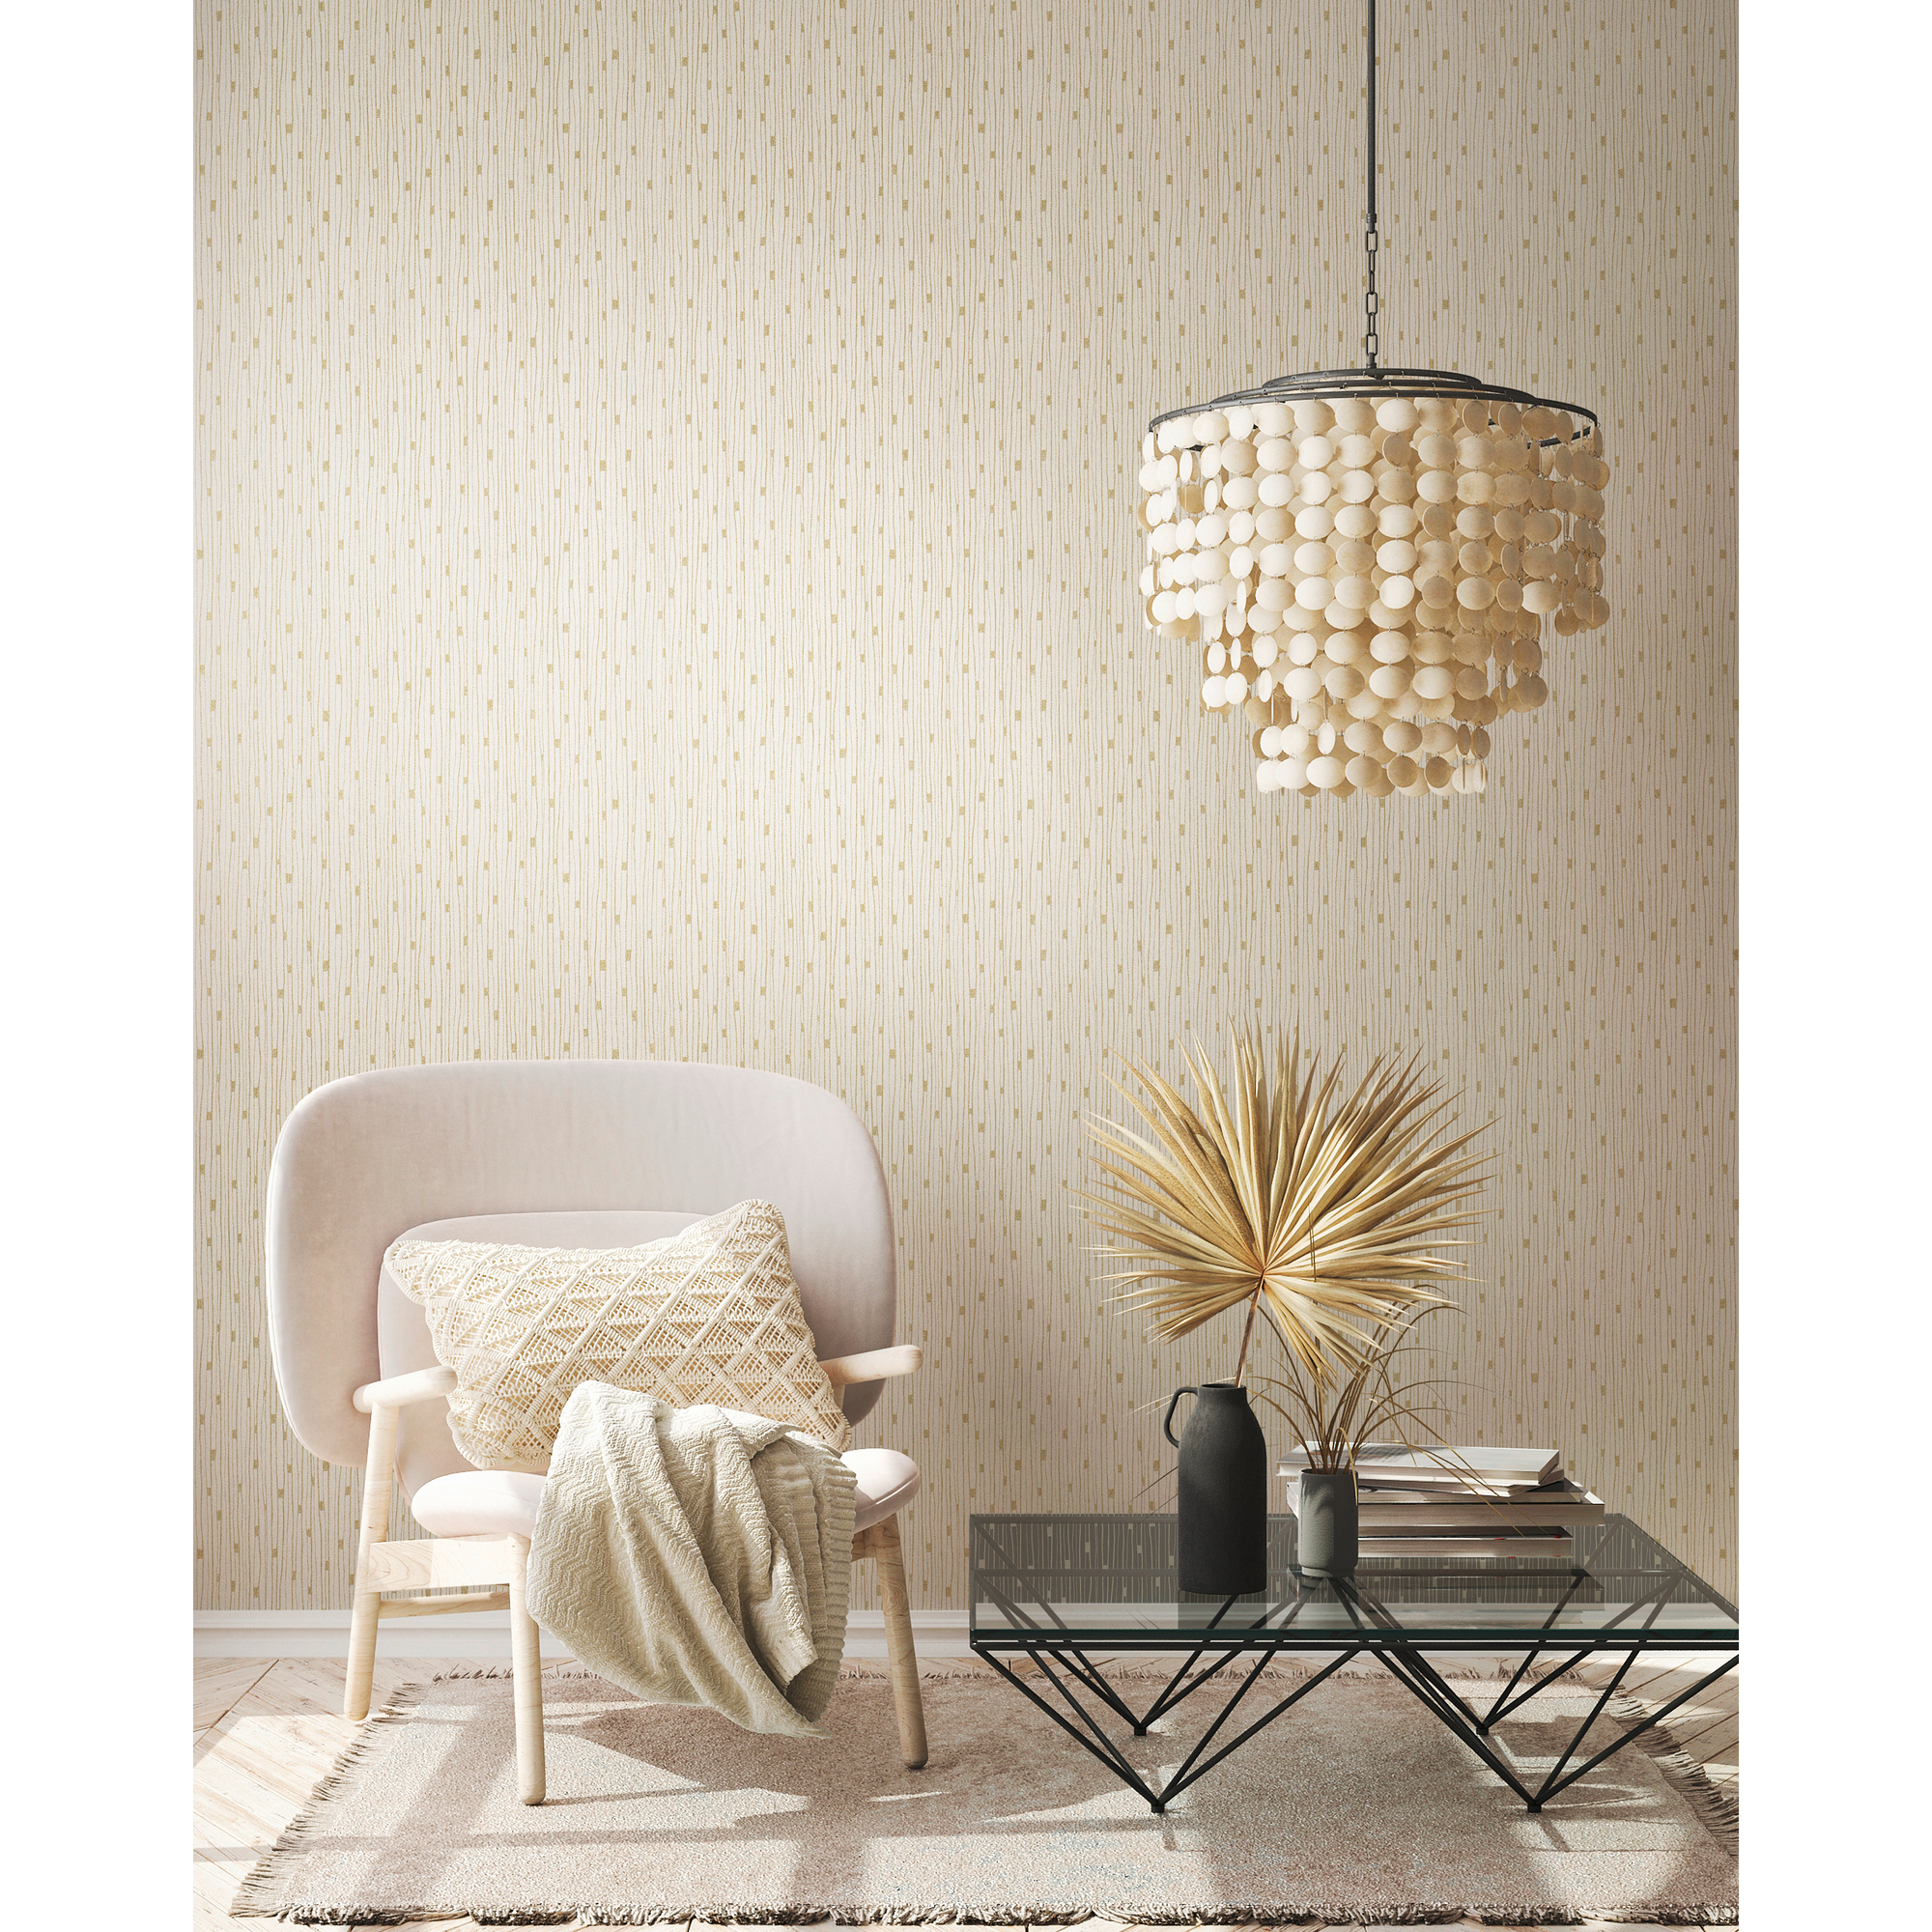 Vliestapete 'The BoS' Linien retro creme/gold 10,05 x 0,53 m + product picture